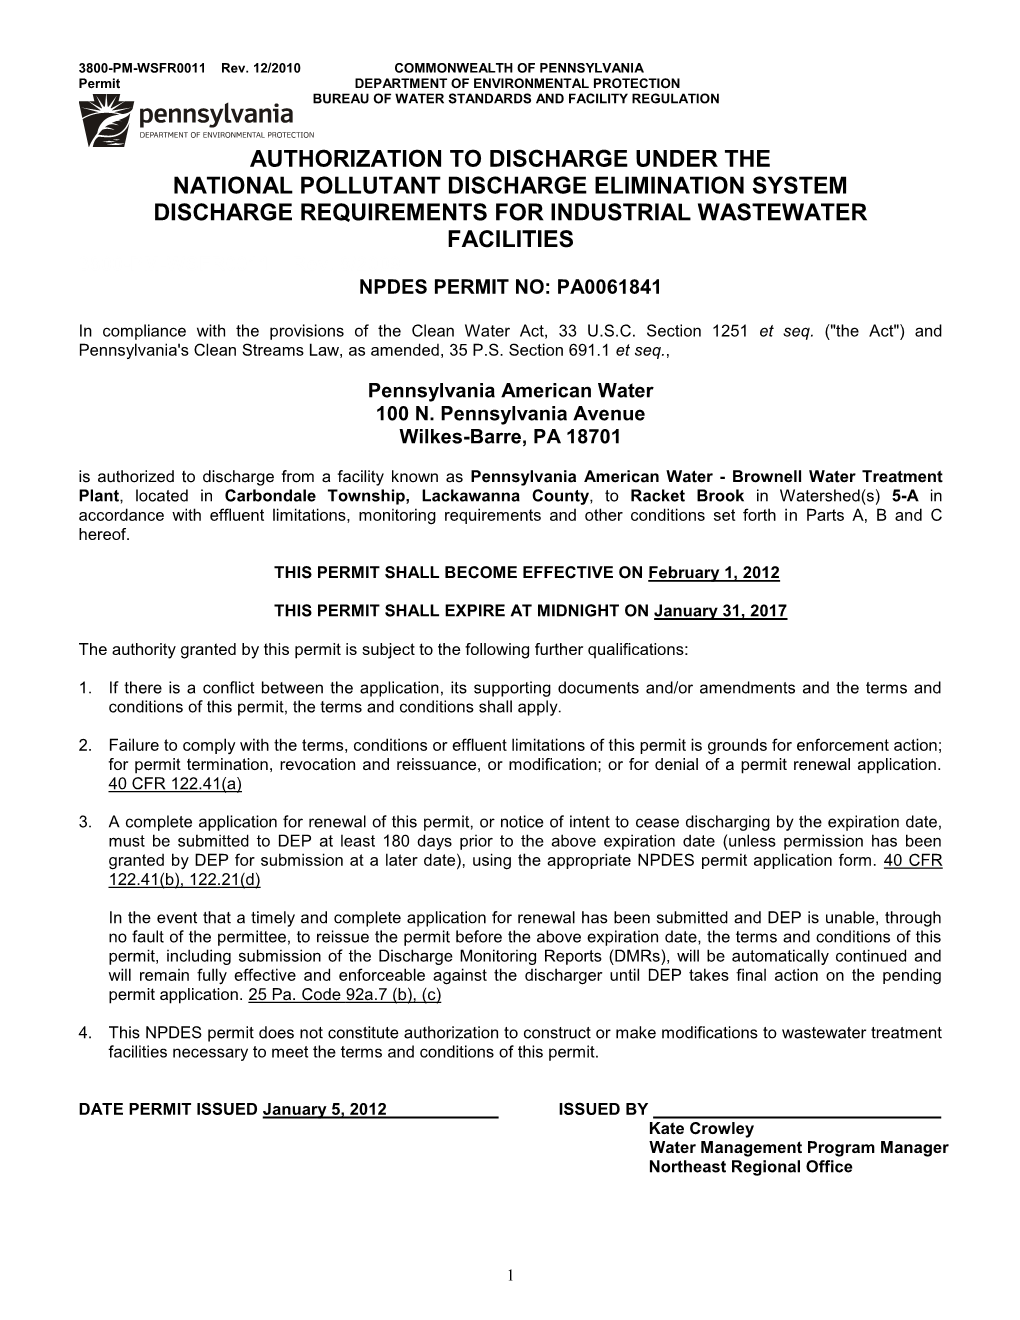 AUTHORIZATION to DISCHARGE UNDER the NATIONAL POLLUTANT DISCHARGE ELIMINATION SYSTEM DISCHARGE REQUIREMENTS for INDUSTRIAL WASTEWATER FACILITIES 3800-PM-WSFR0011 Rev